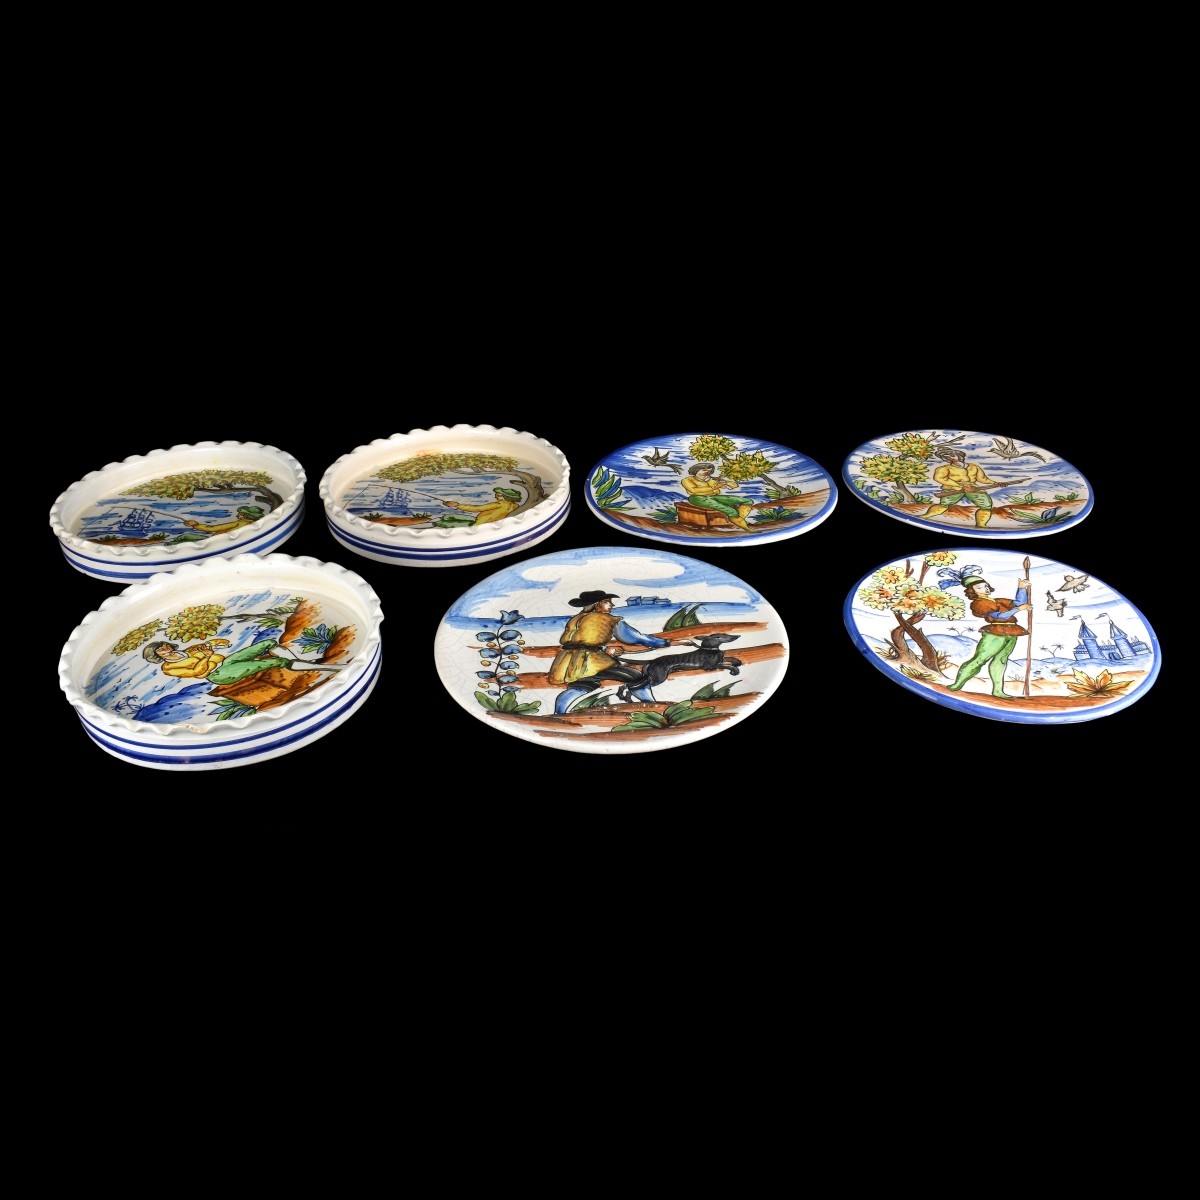 Grouping of Ten (10) Spanish Faience Pottery